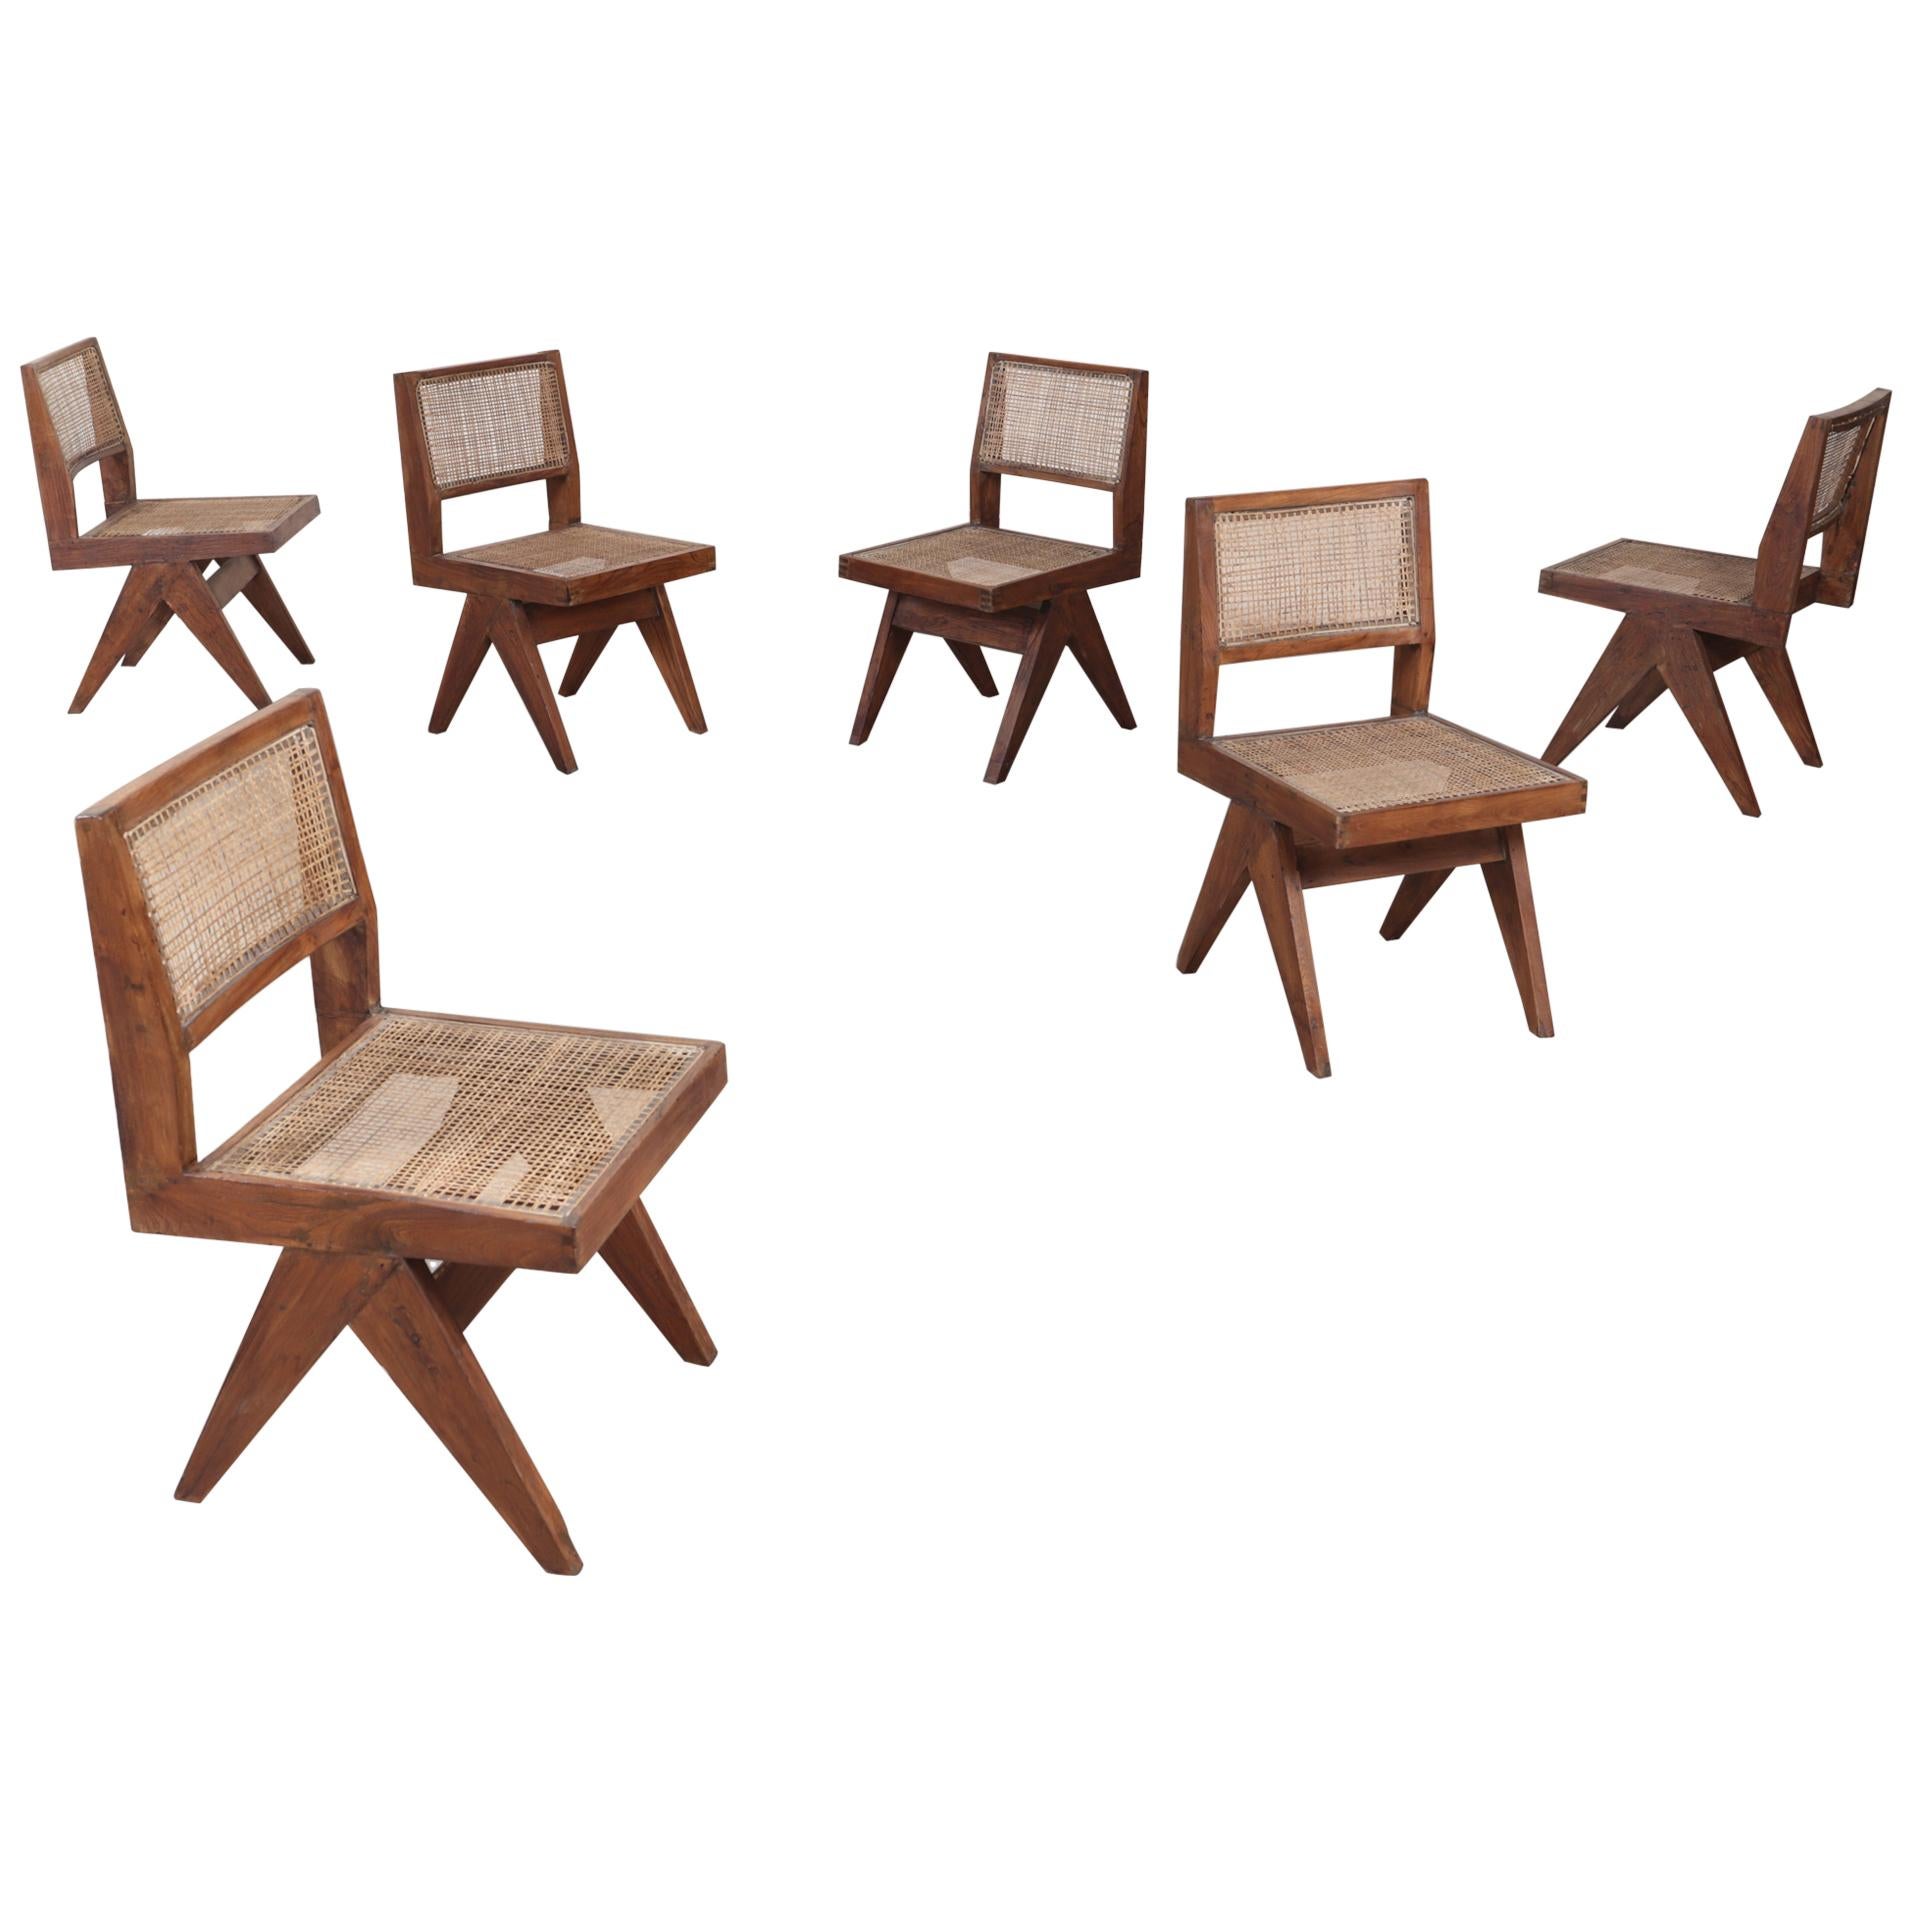 Suite of 6 Chairs "Dining Chairs" by Pierre Jeanneret'